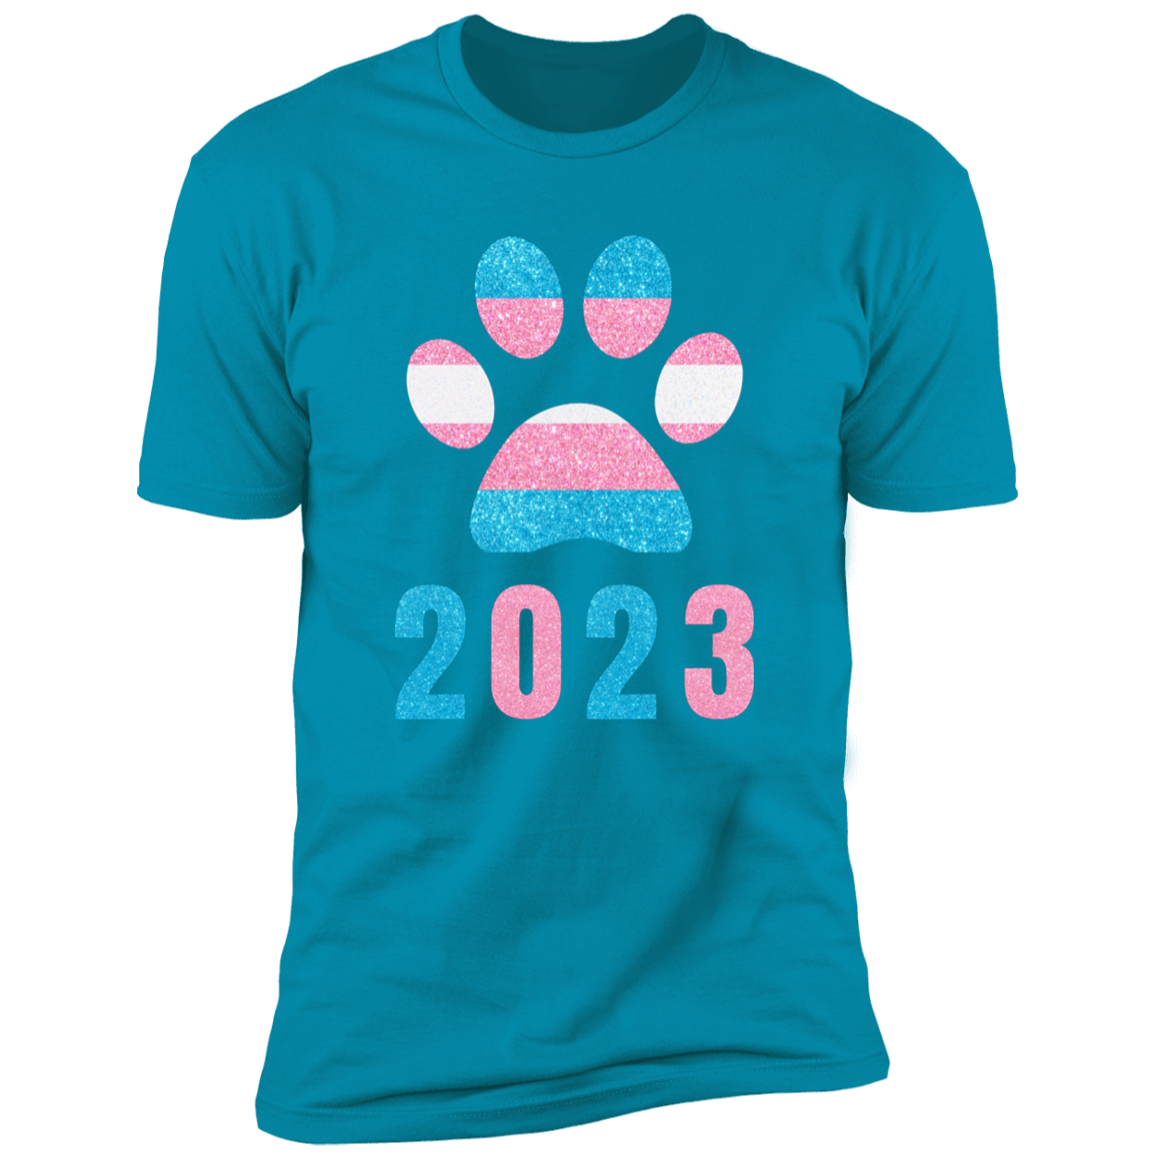 Dog Paw Trans Pride 2023 t-shirt, dog trans pride dog shirt for humans, in turquoise